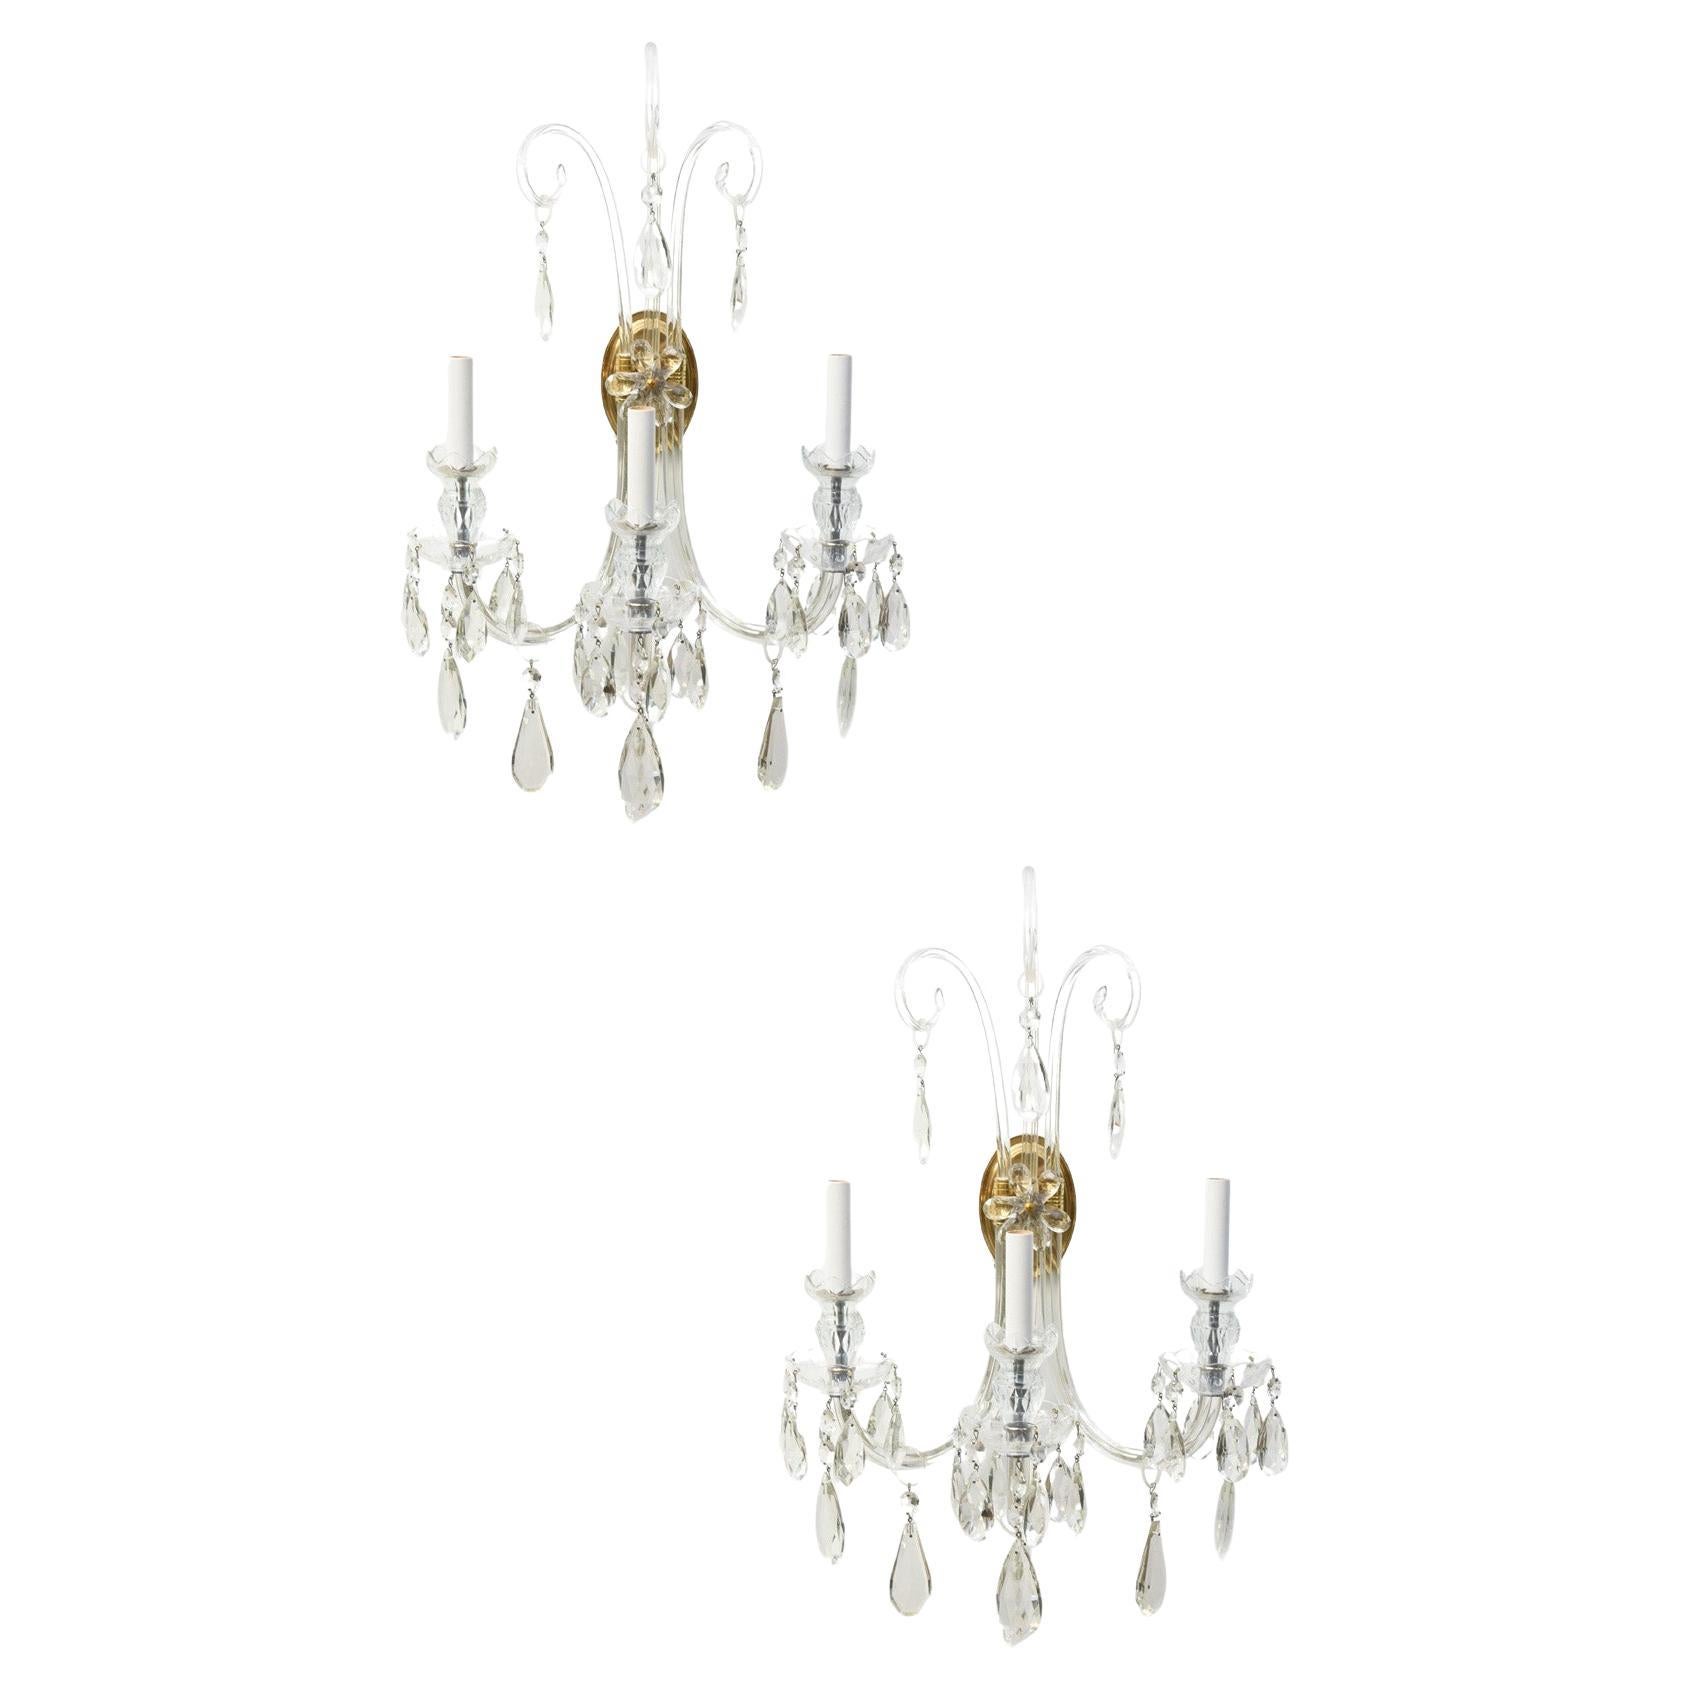 Mid-20th Century Lafount Style Crystal Sconces, a Pair